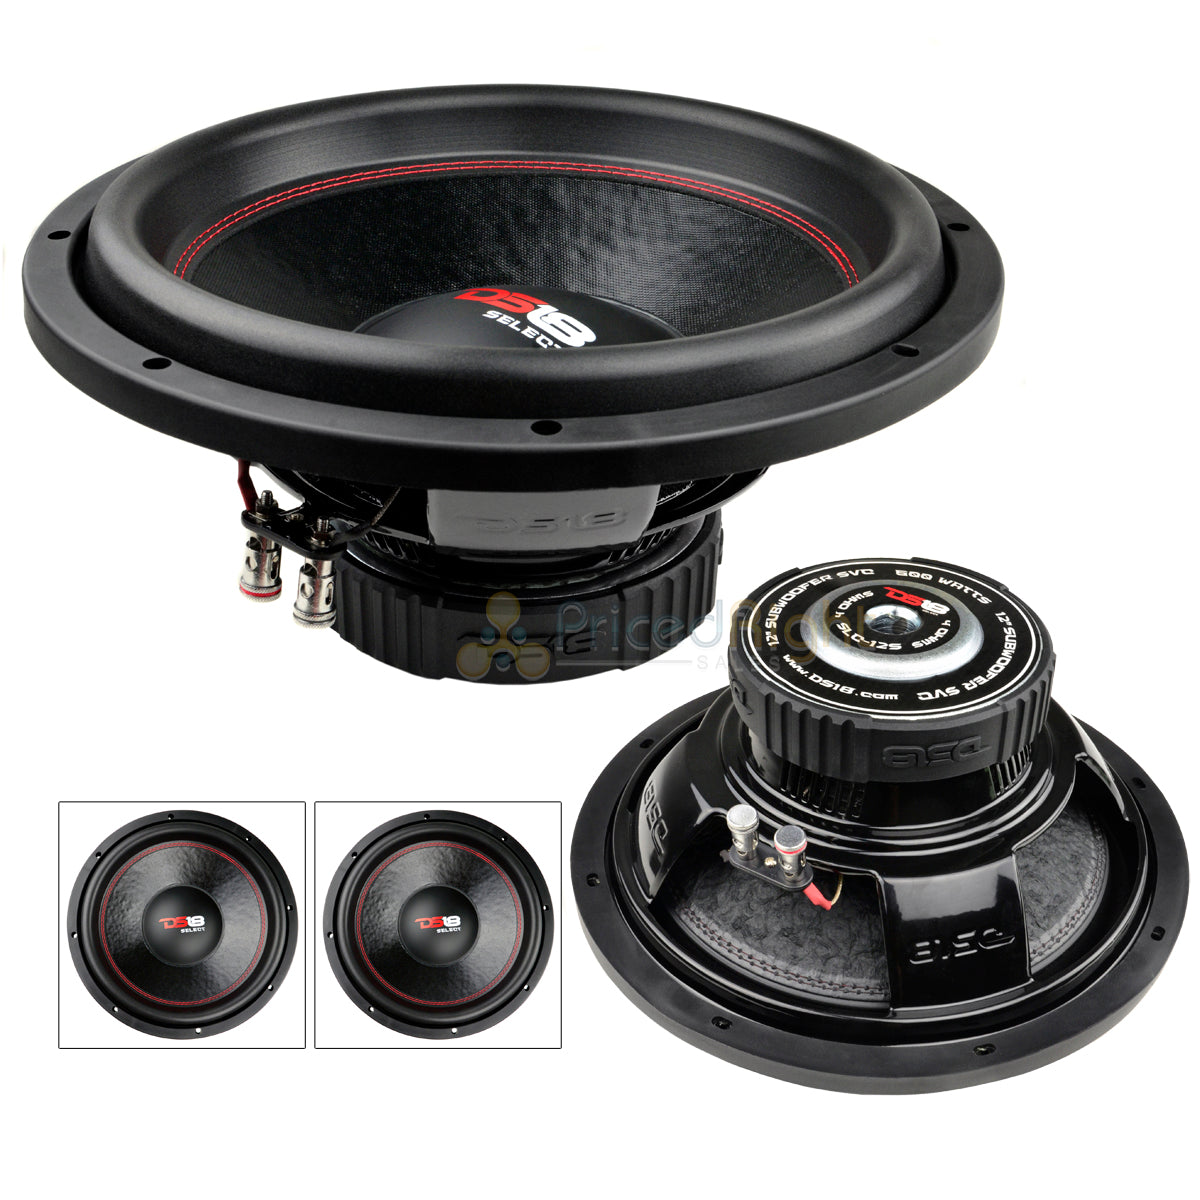 2 DS18 SLC-12S 12" Inch Subwoofers 500 Watts Max Power 4 Ohm Sub Select Series